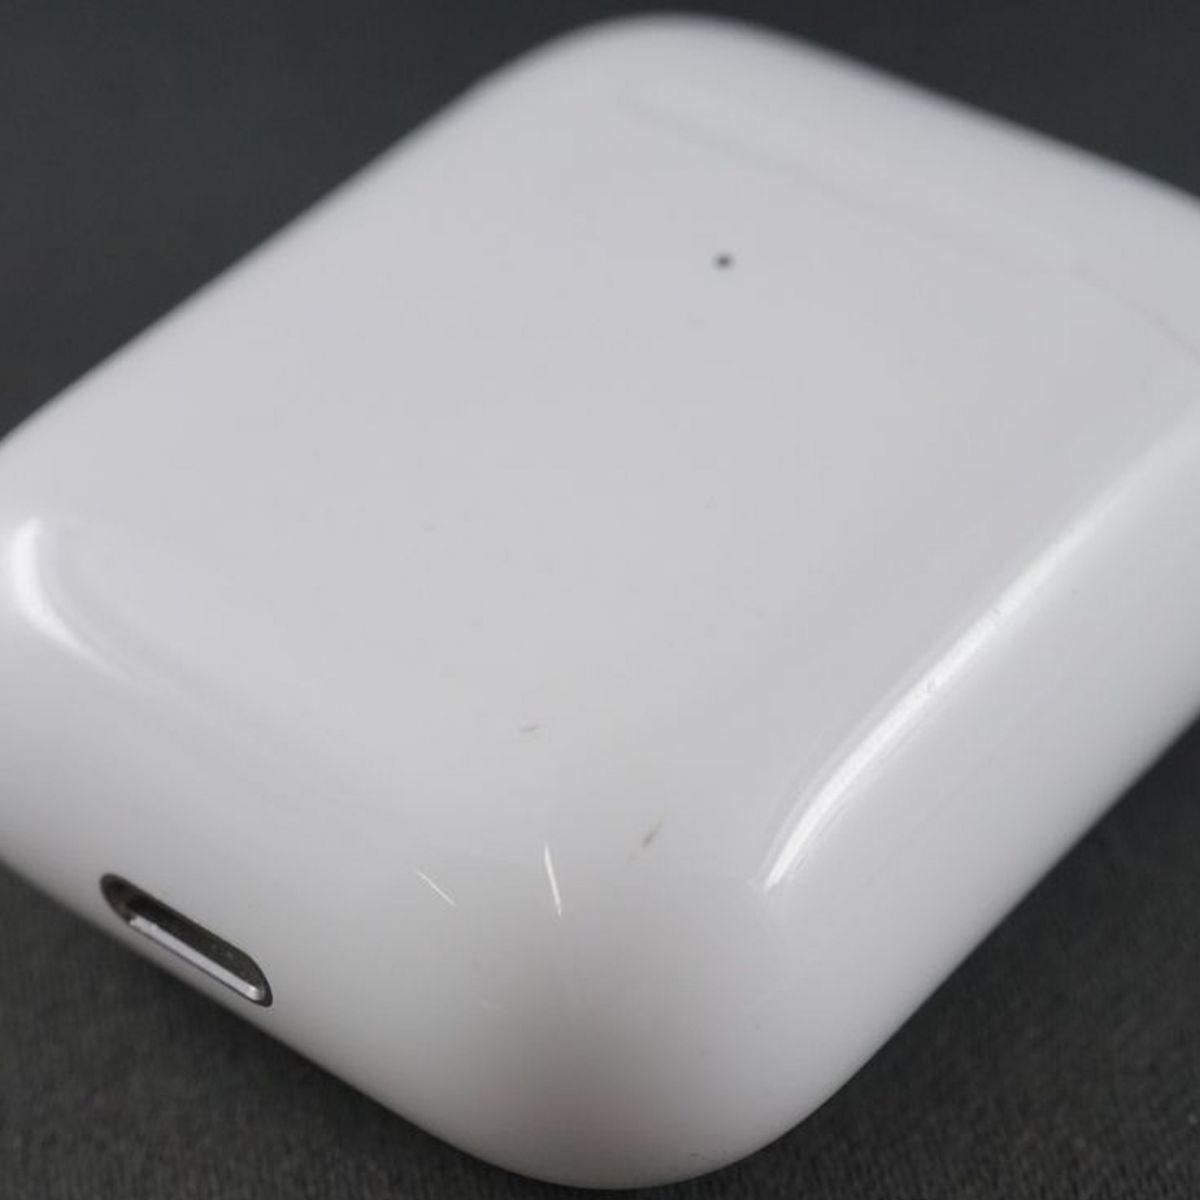 Apple AirPods with Wireless Charging Case エアーポッズ イヤホン USED美品 第二世代 MRXJ2J/A 完動品 中古 V9657_画像7